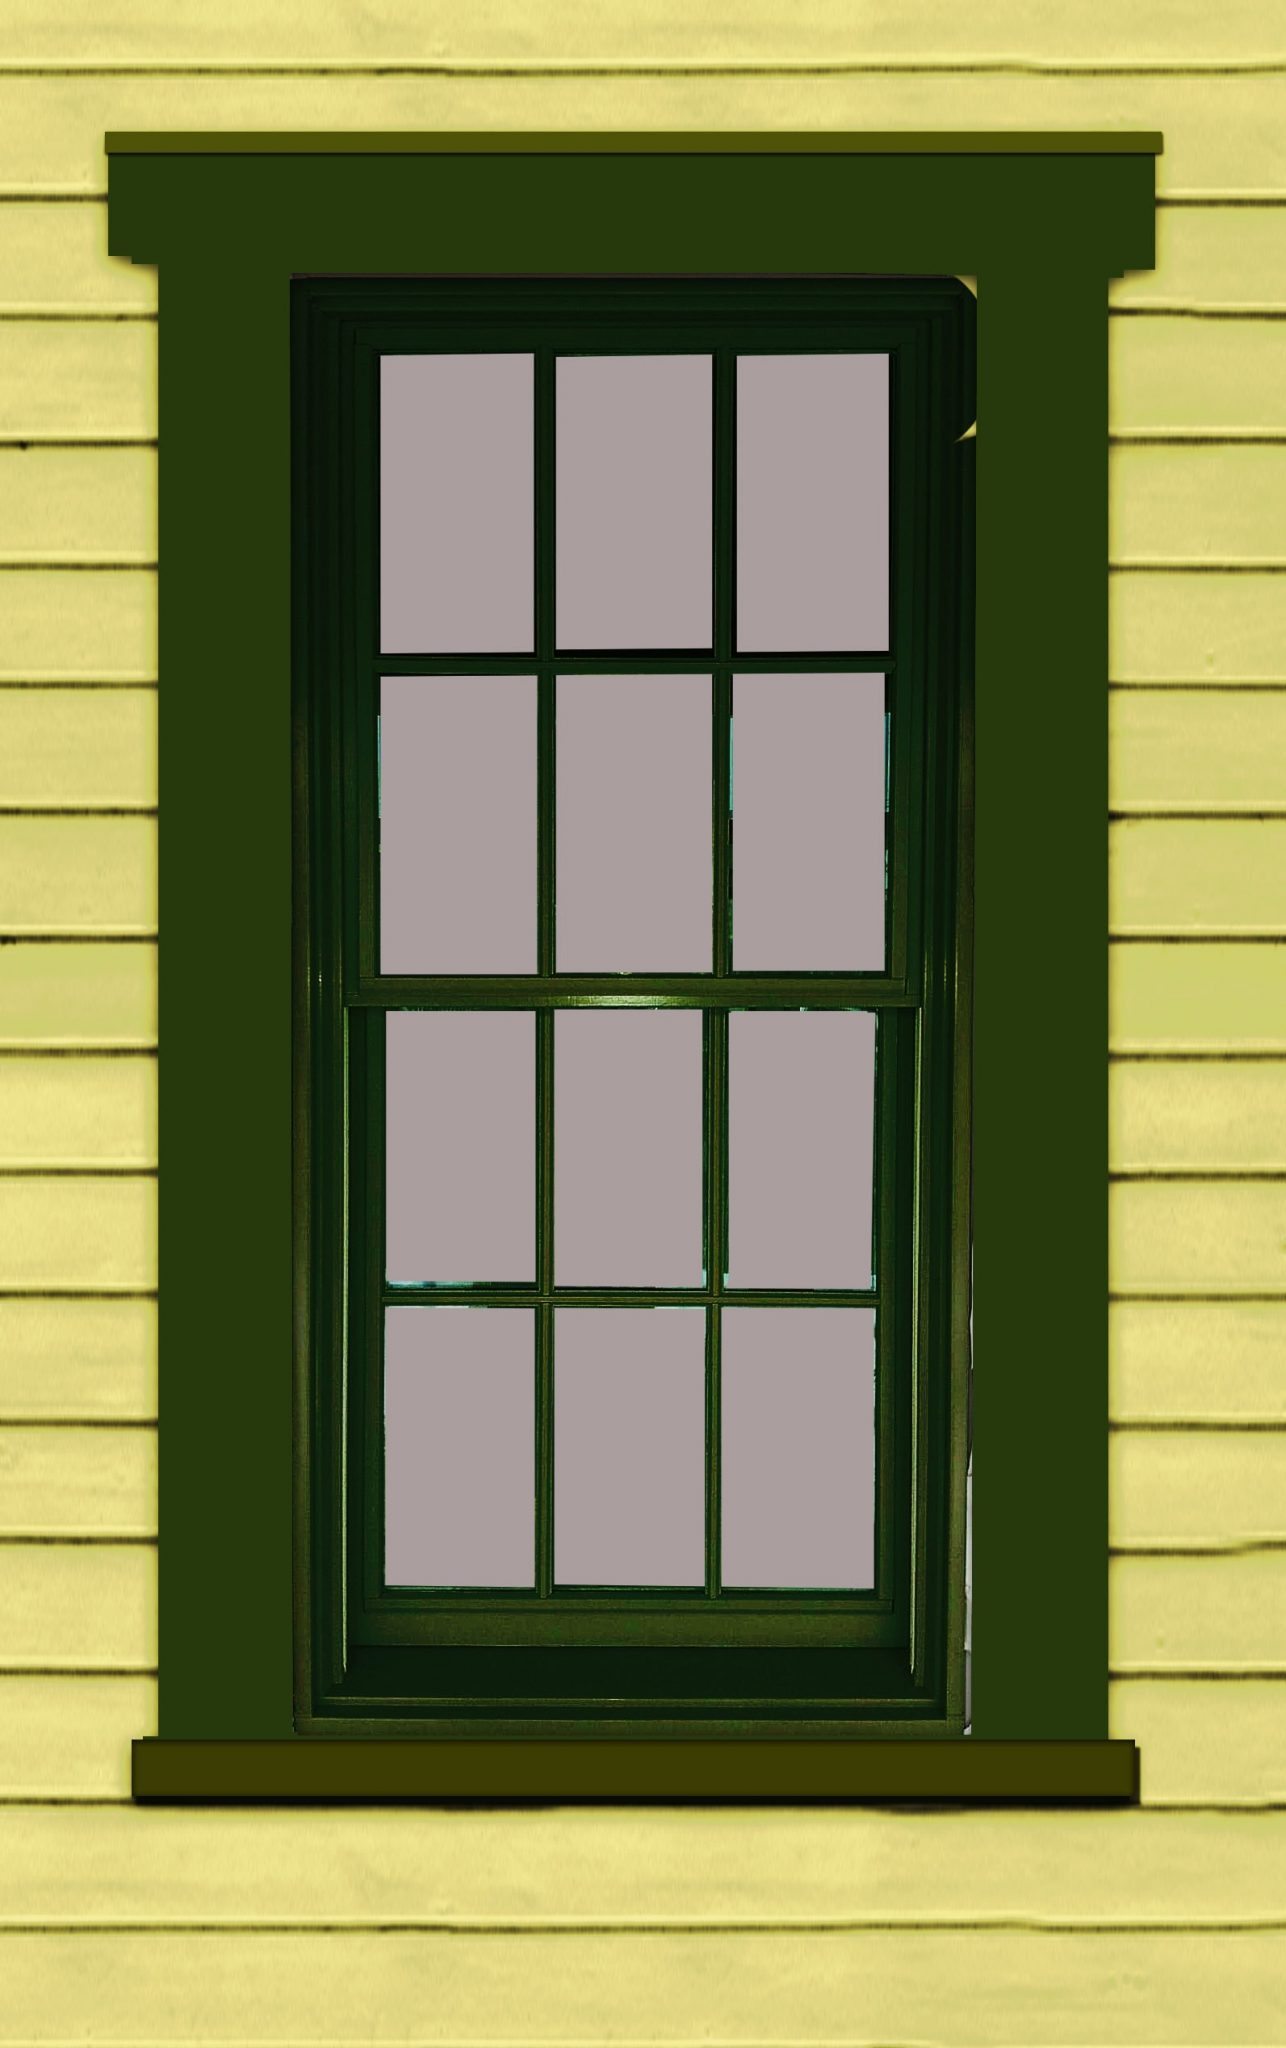 Painting Windows - Color Placement Mistakes